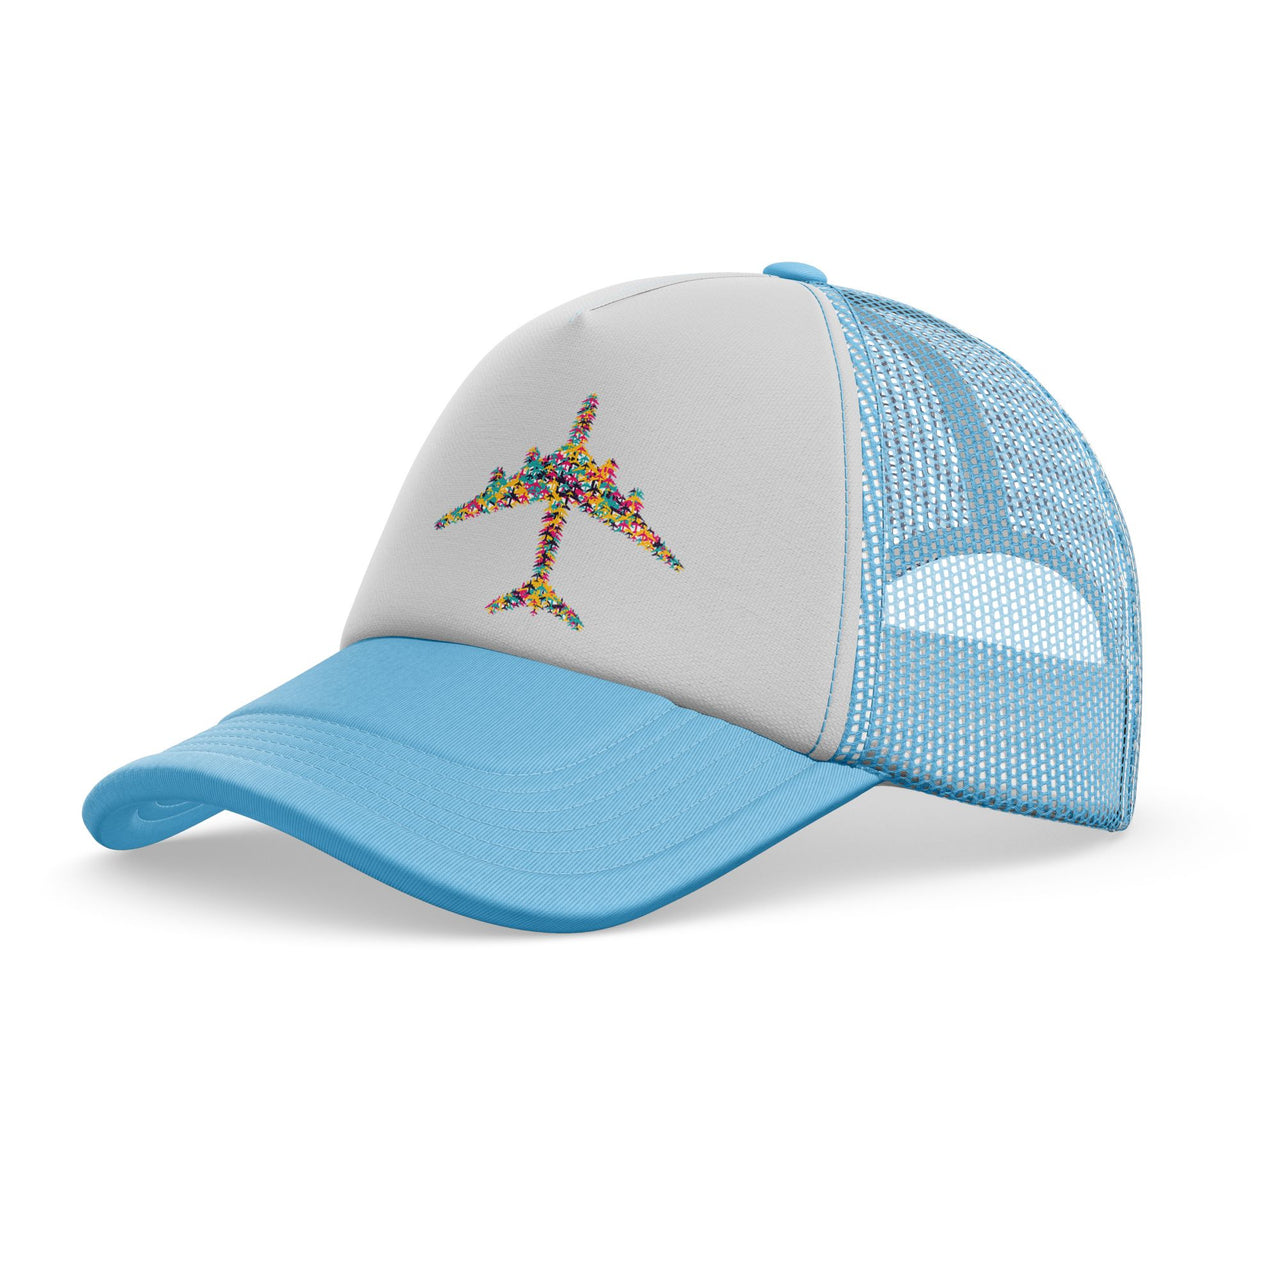 Colourful Airplane Designed Trucker Caps & Hats